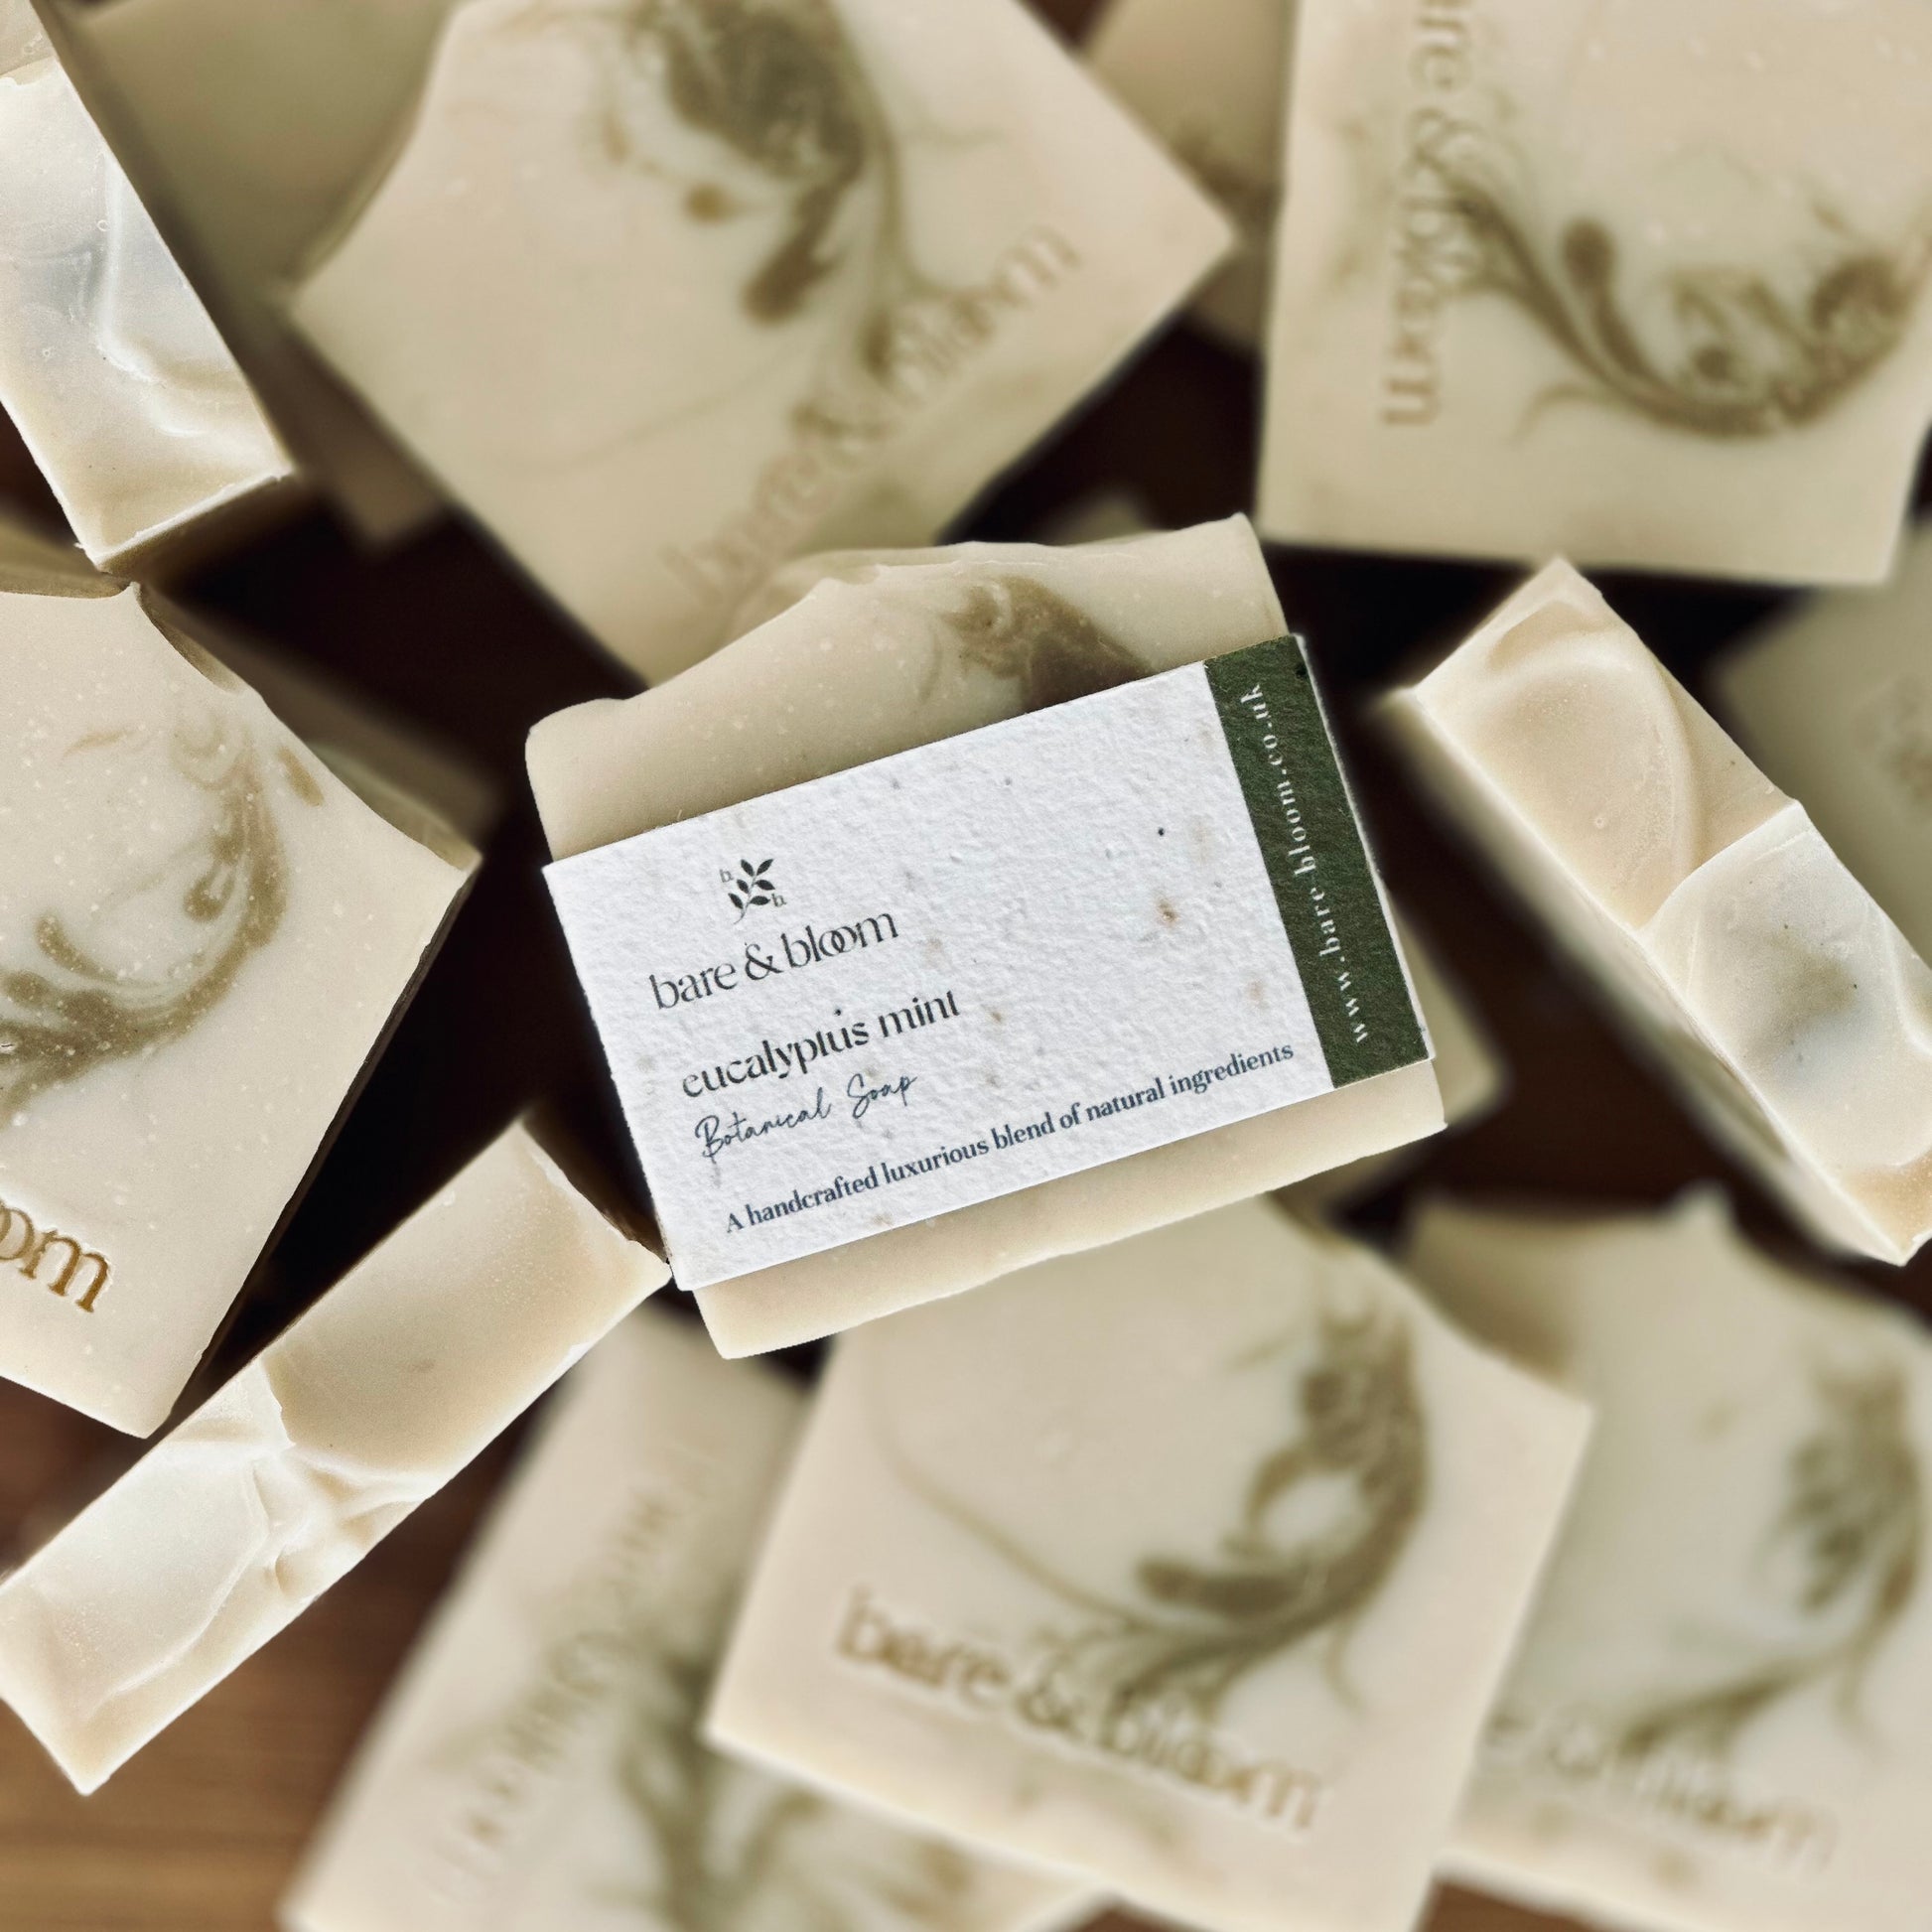 eucalyptus mint artisan soap with seeded label